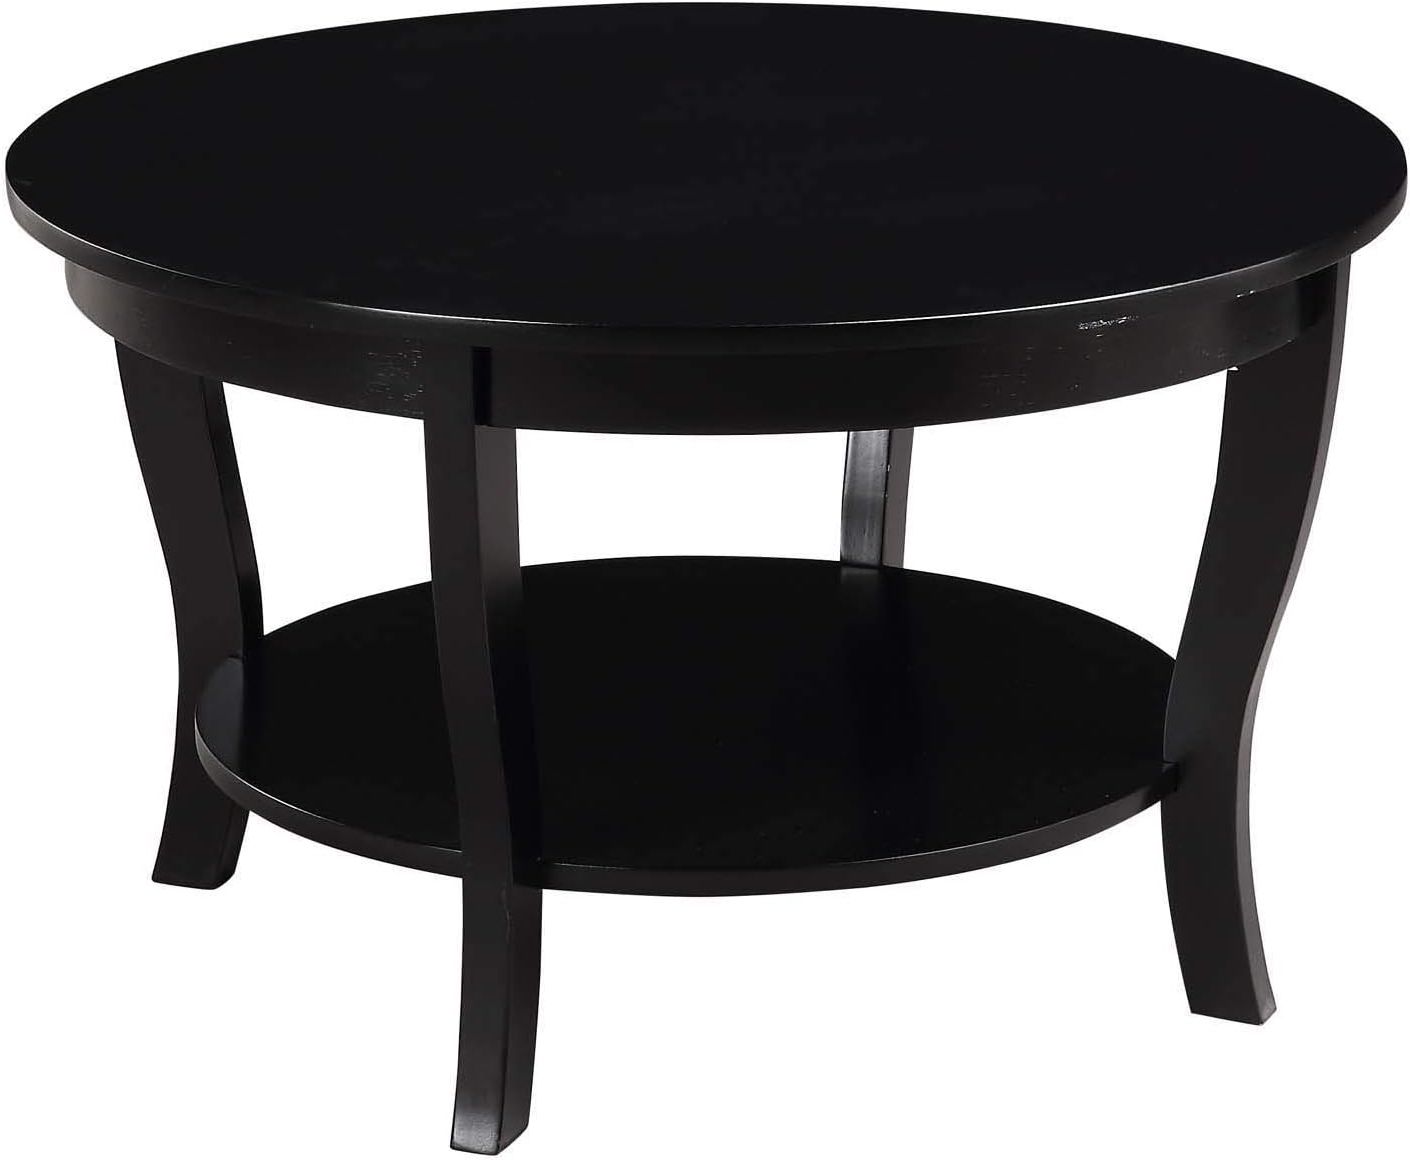 Popular Amazon: Convenience Concepts American Heritage Round Coffee Table Pertaining To American Heritage Round Coffee Tables (View 6 of 15)